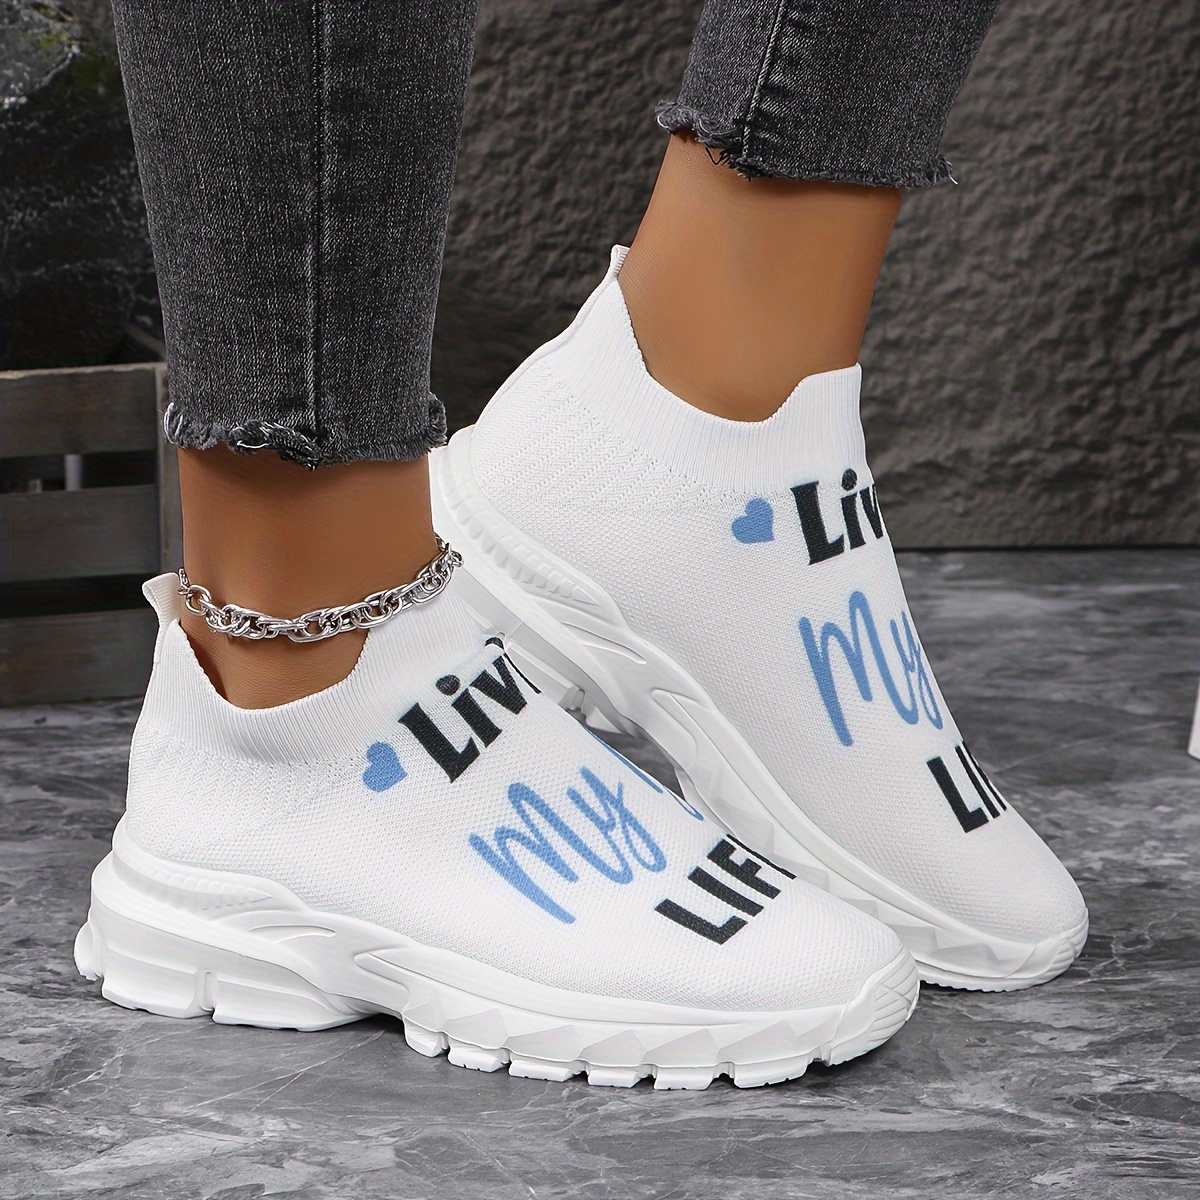 

Women's Casual Knit Sneakers, Letter Breathable Athletic Running Shoes With Chunky Sole, Comfy Slip-on Walking Shoes